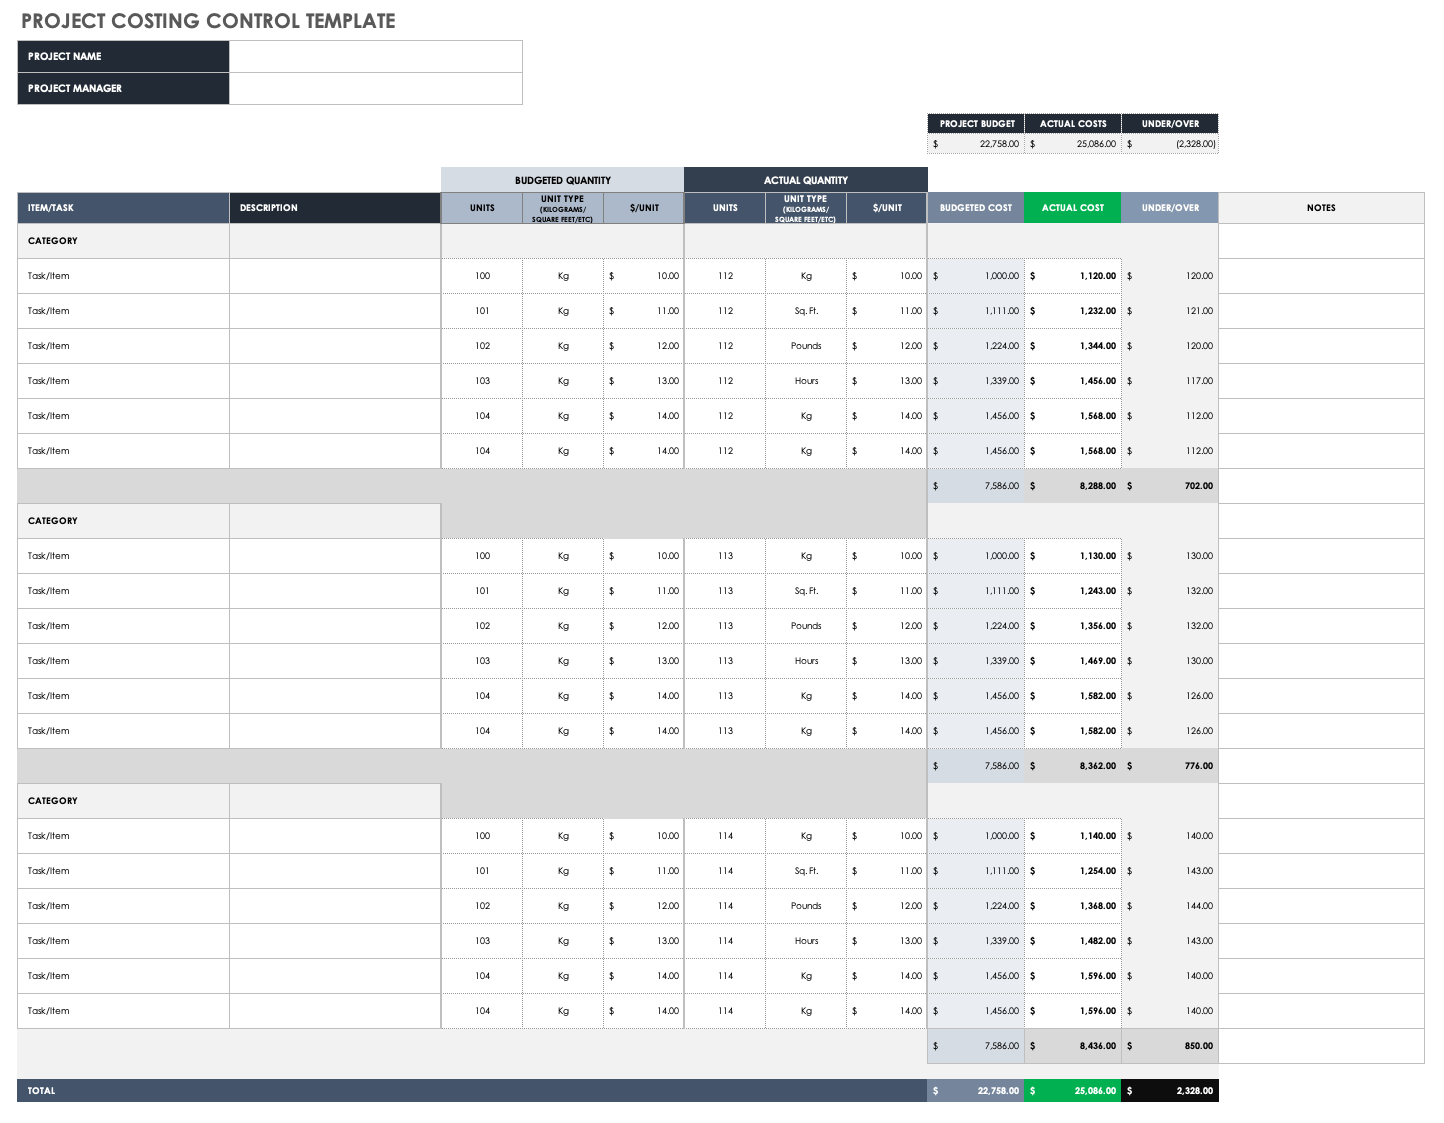 Project Costing Control Template